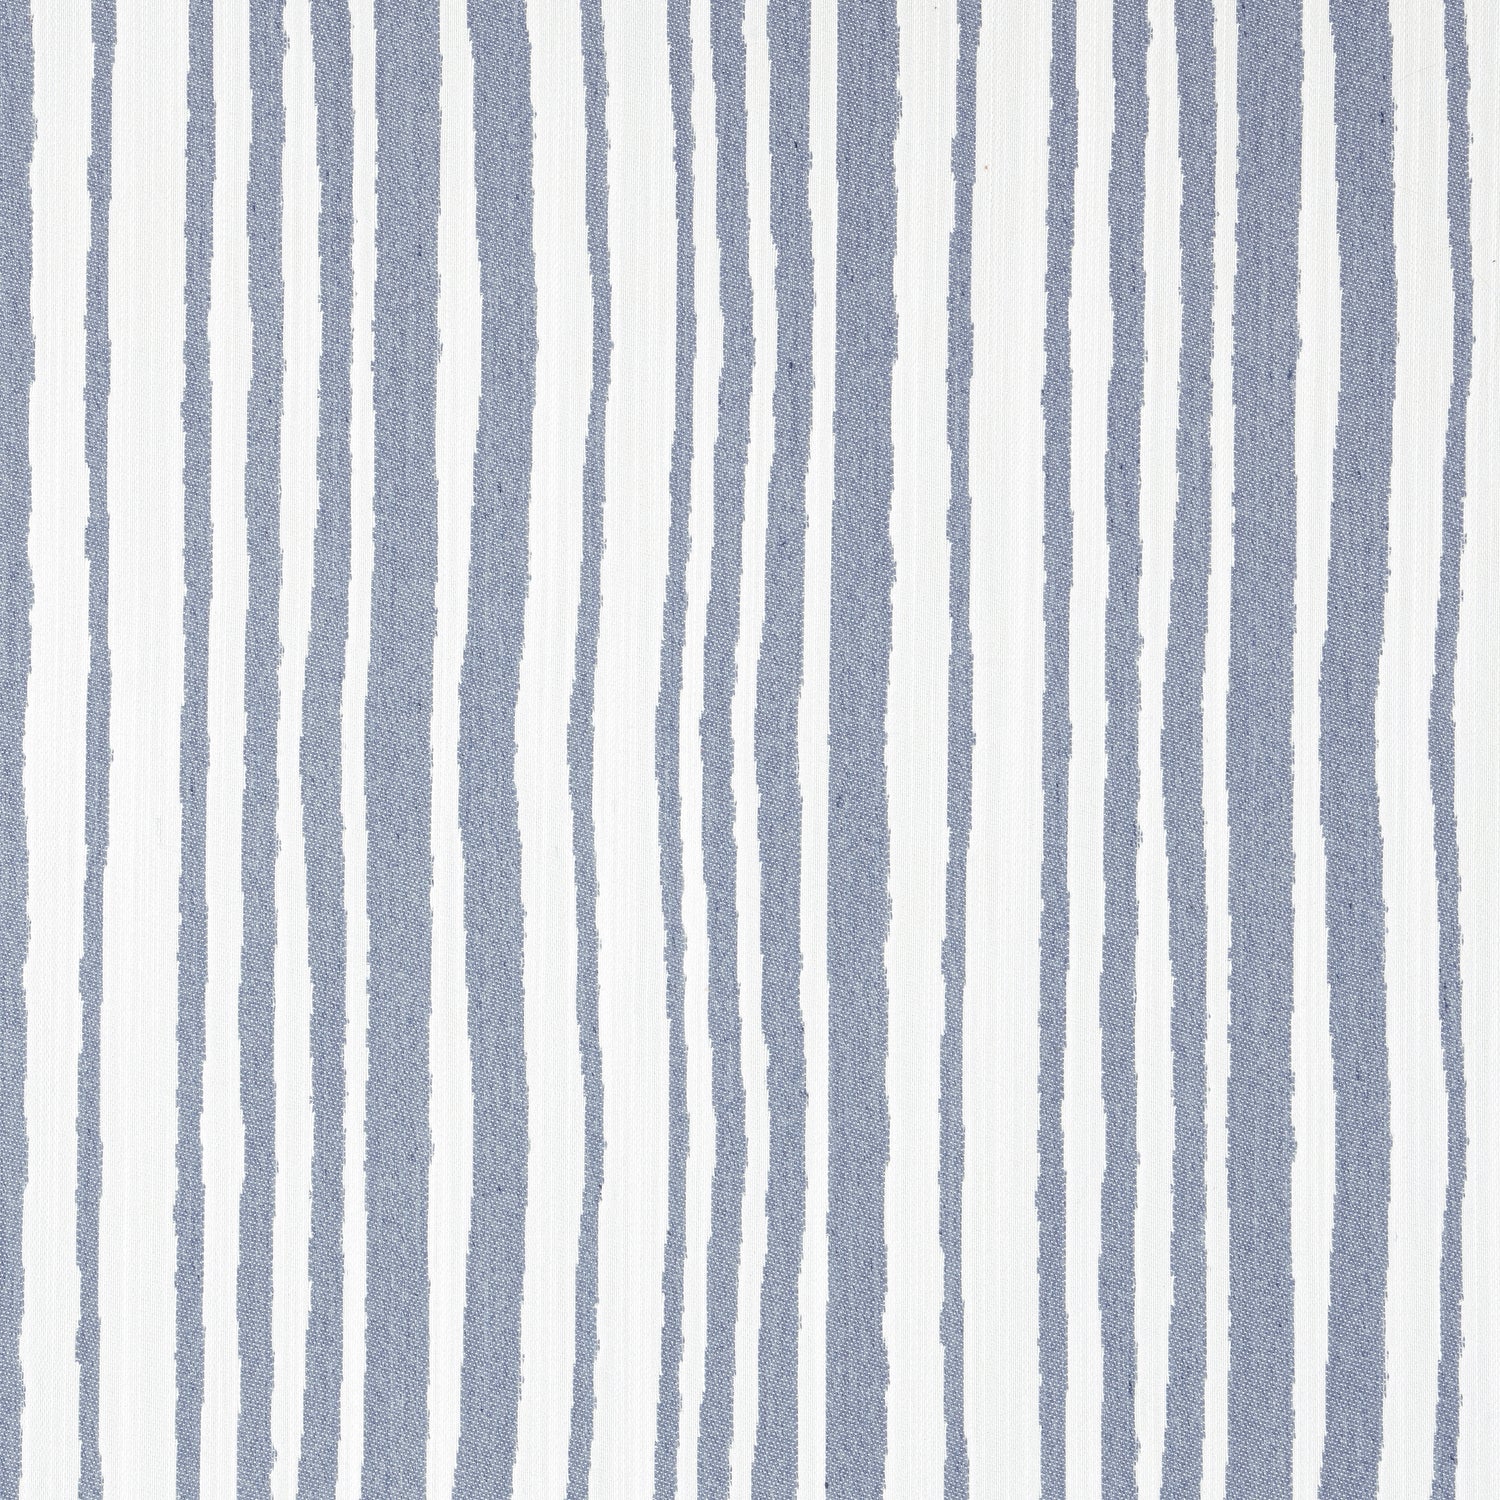 Pintado Stripe fabric in horizon color - pattern number W8503 - by Thibaut in the Villa collection